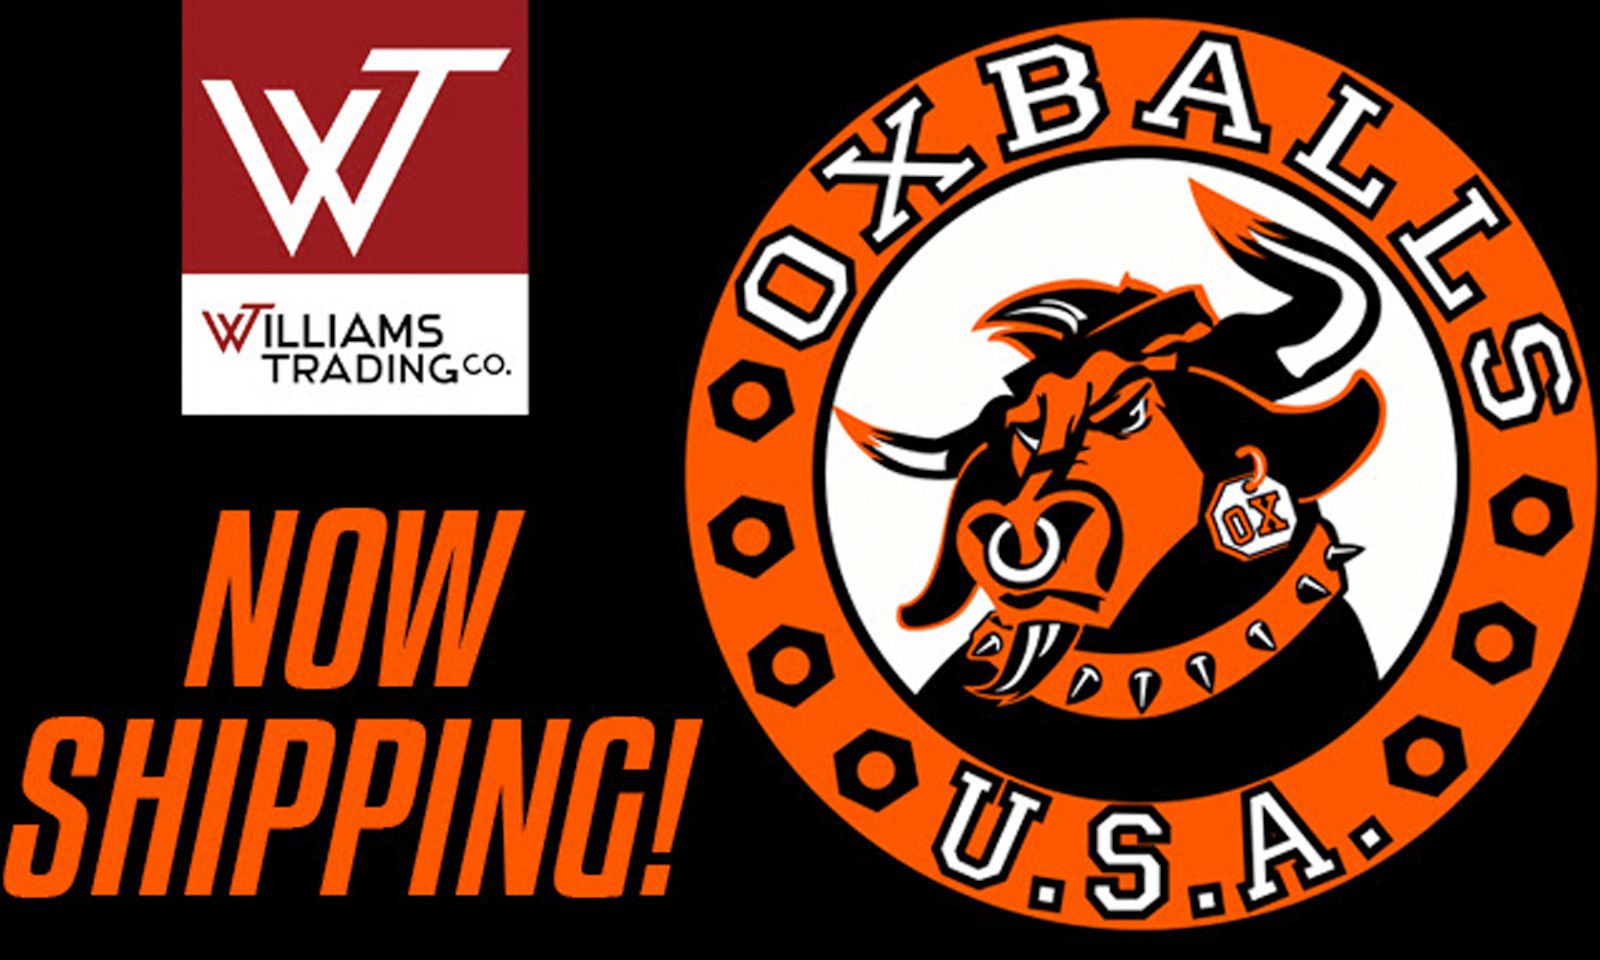 Oxballs Now Shipping From Williams Trading Co.